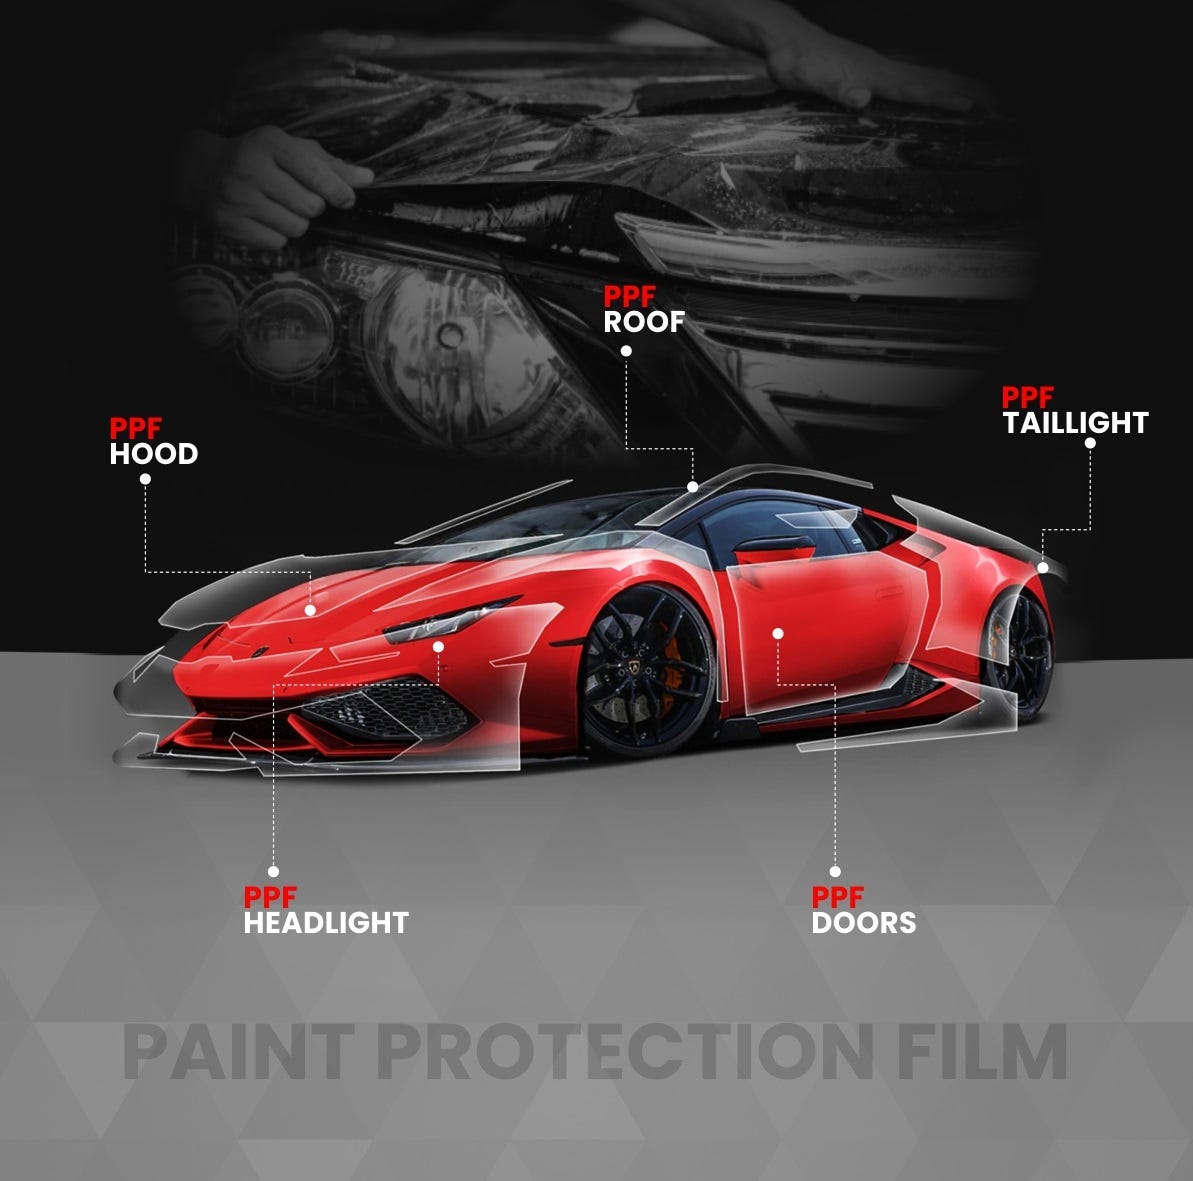 Top 5 Areas on a Car to Protect with PPF